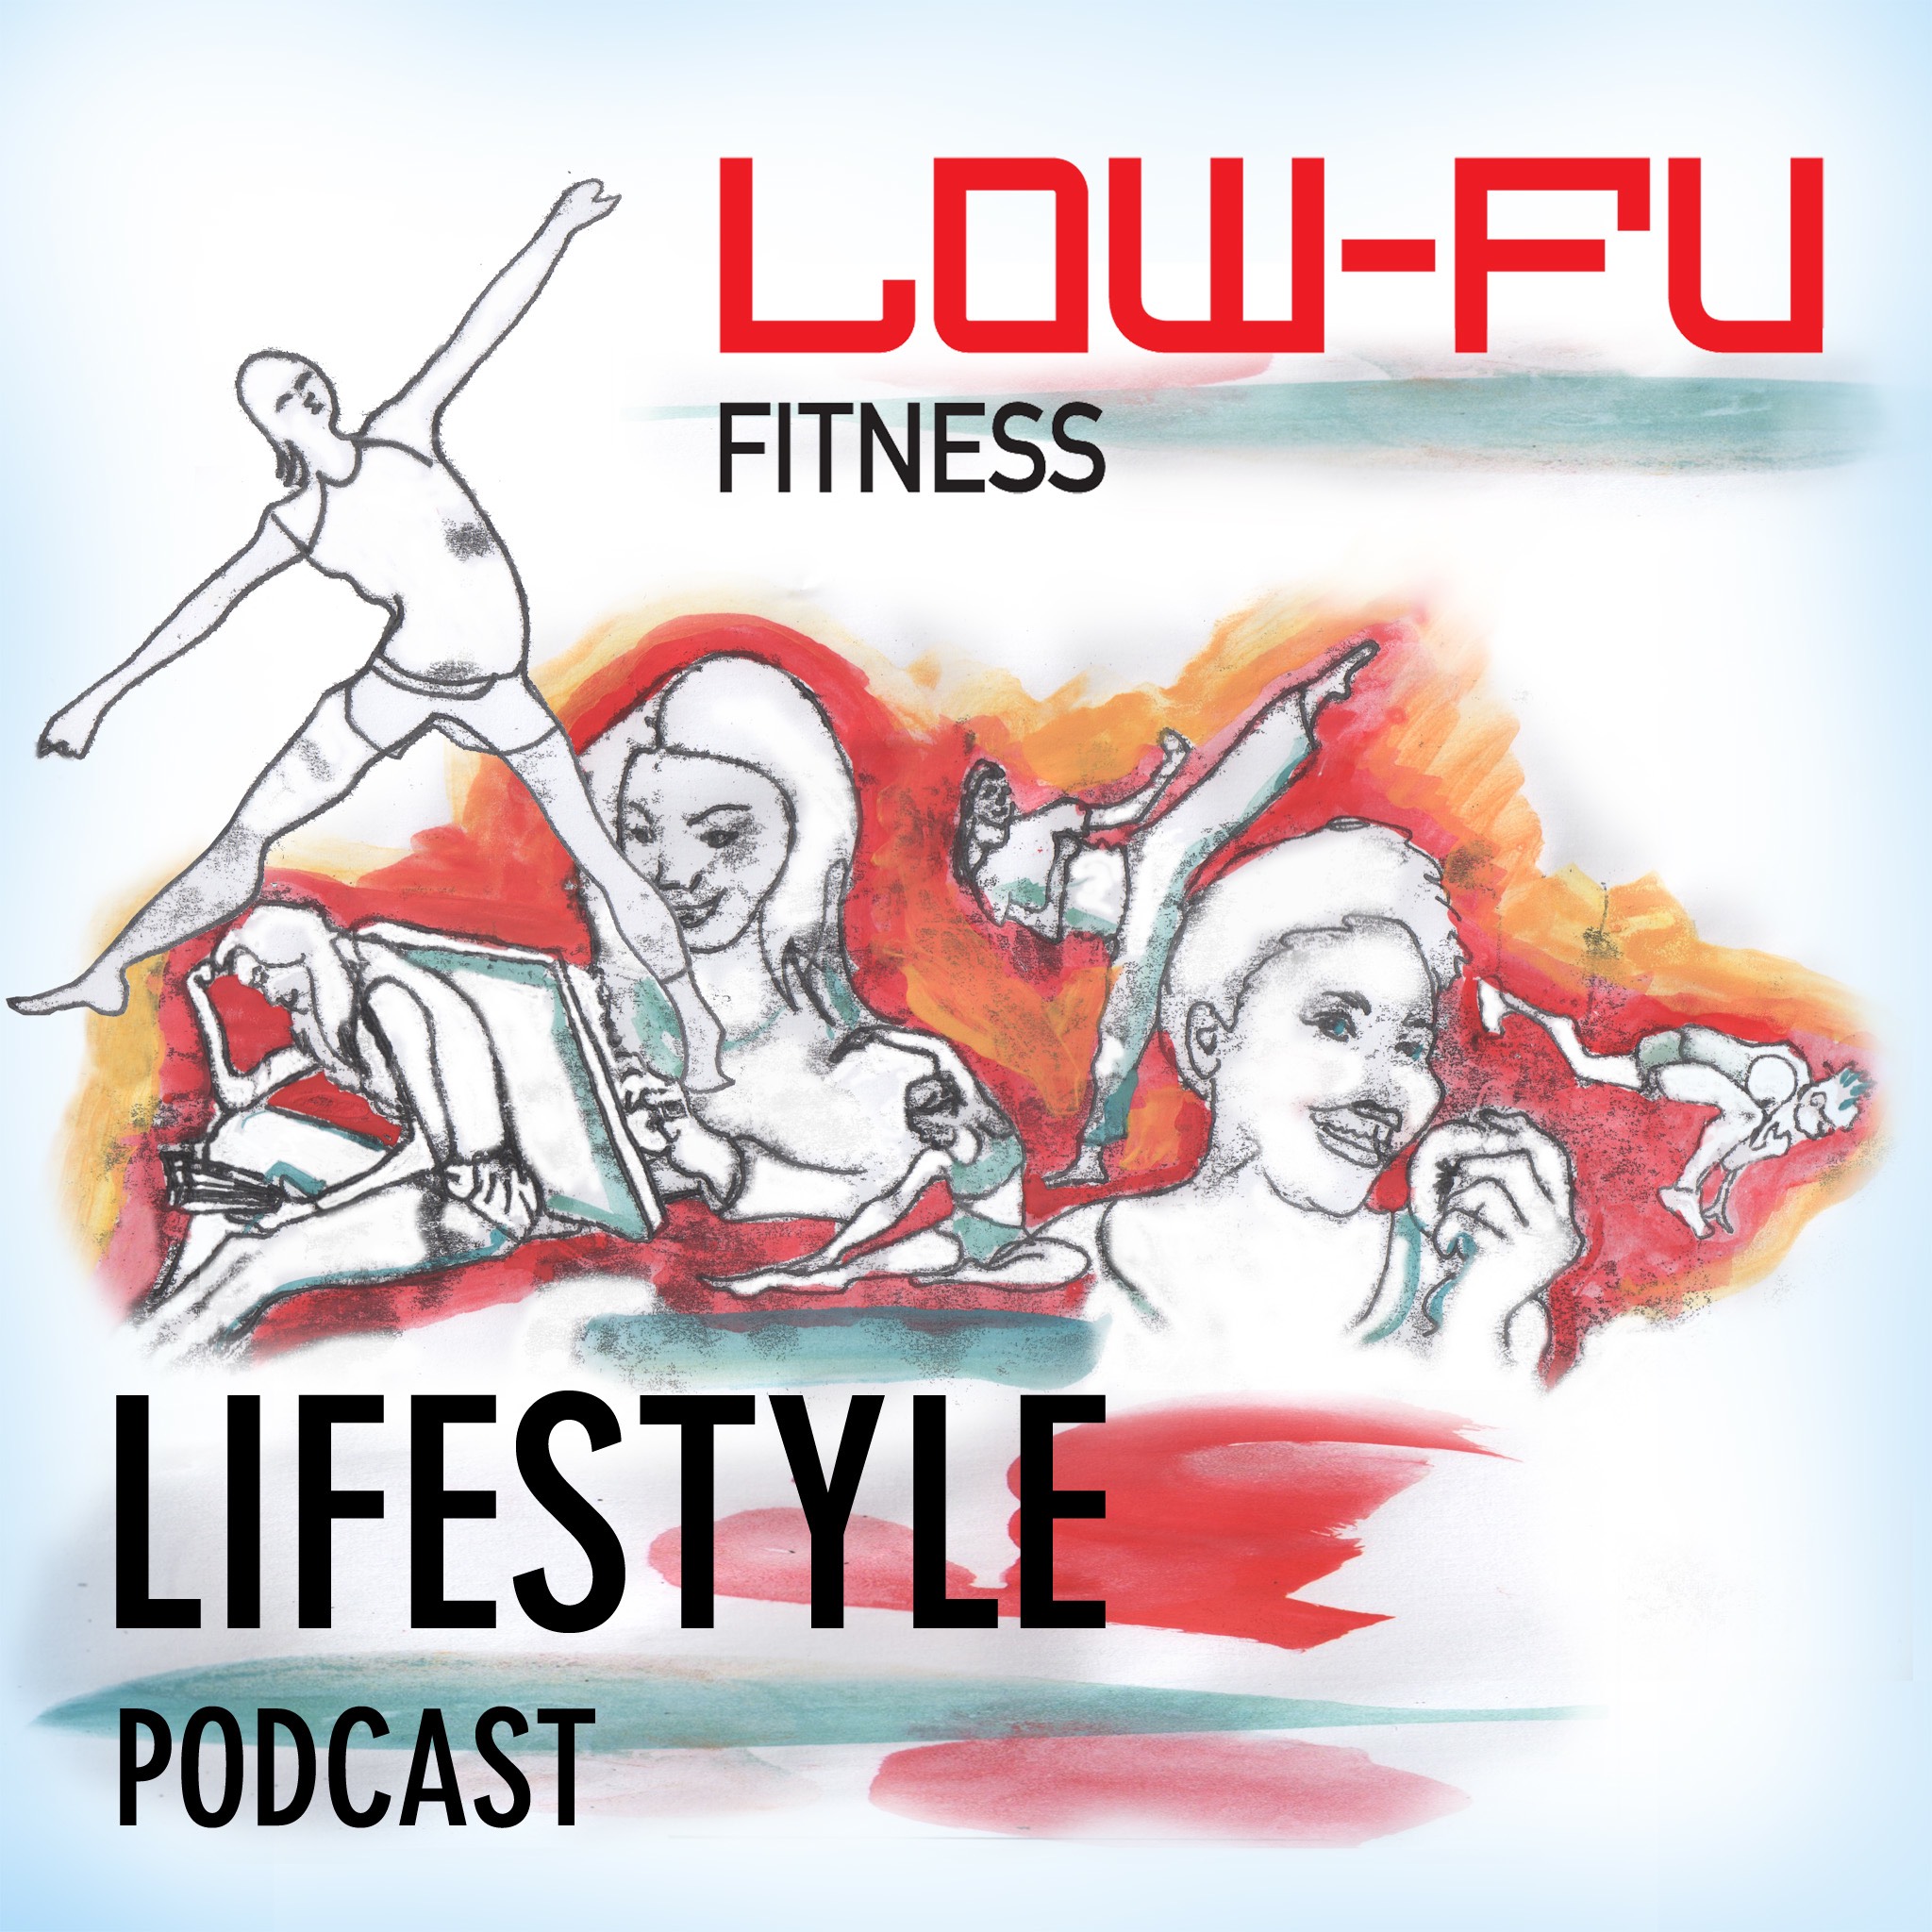 Episode 57: Fitness Audition - The Good and the Bad